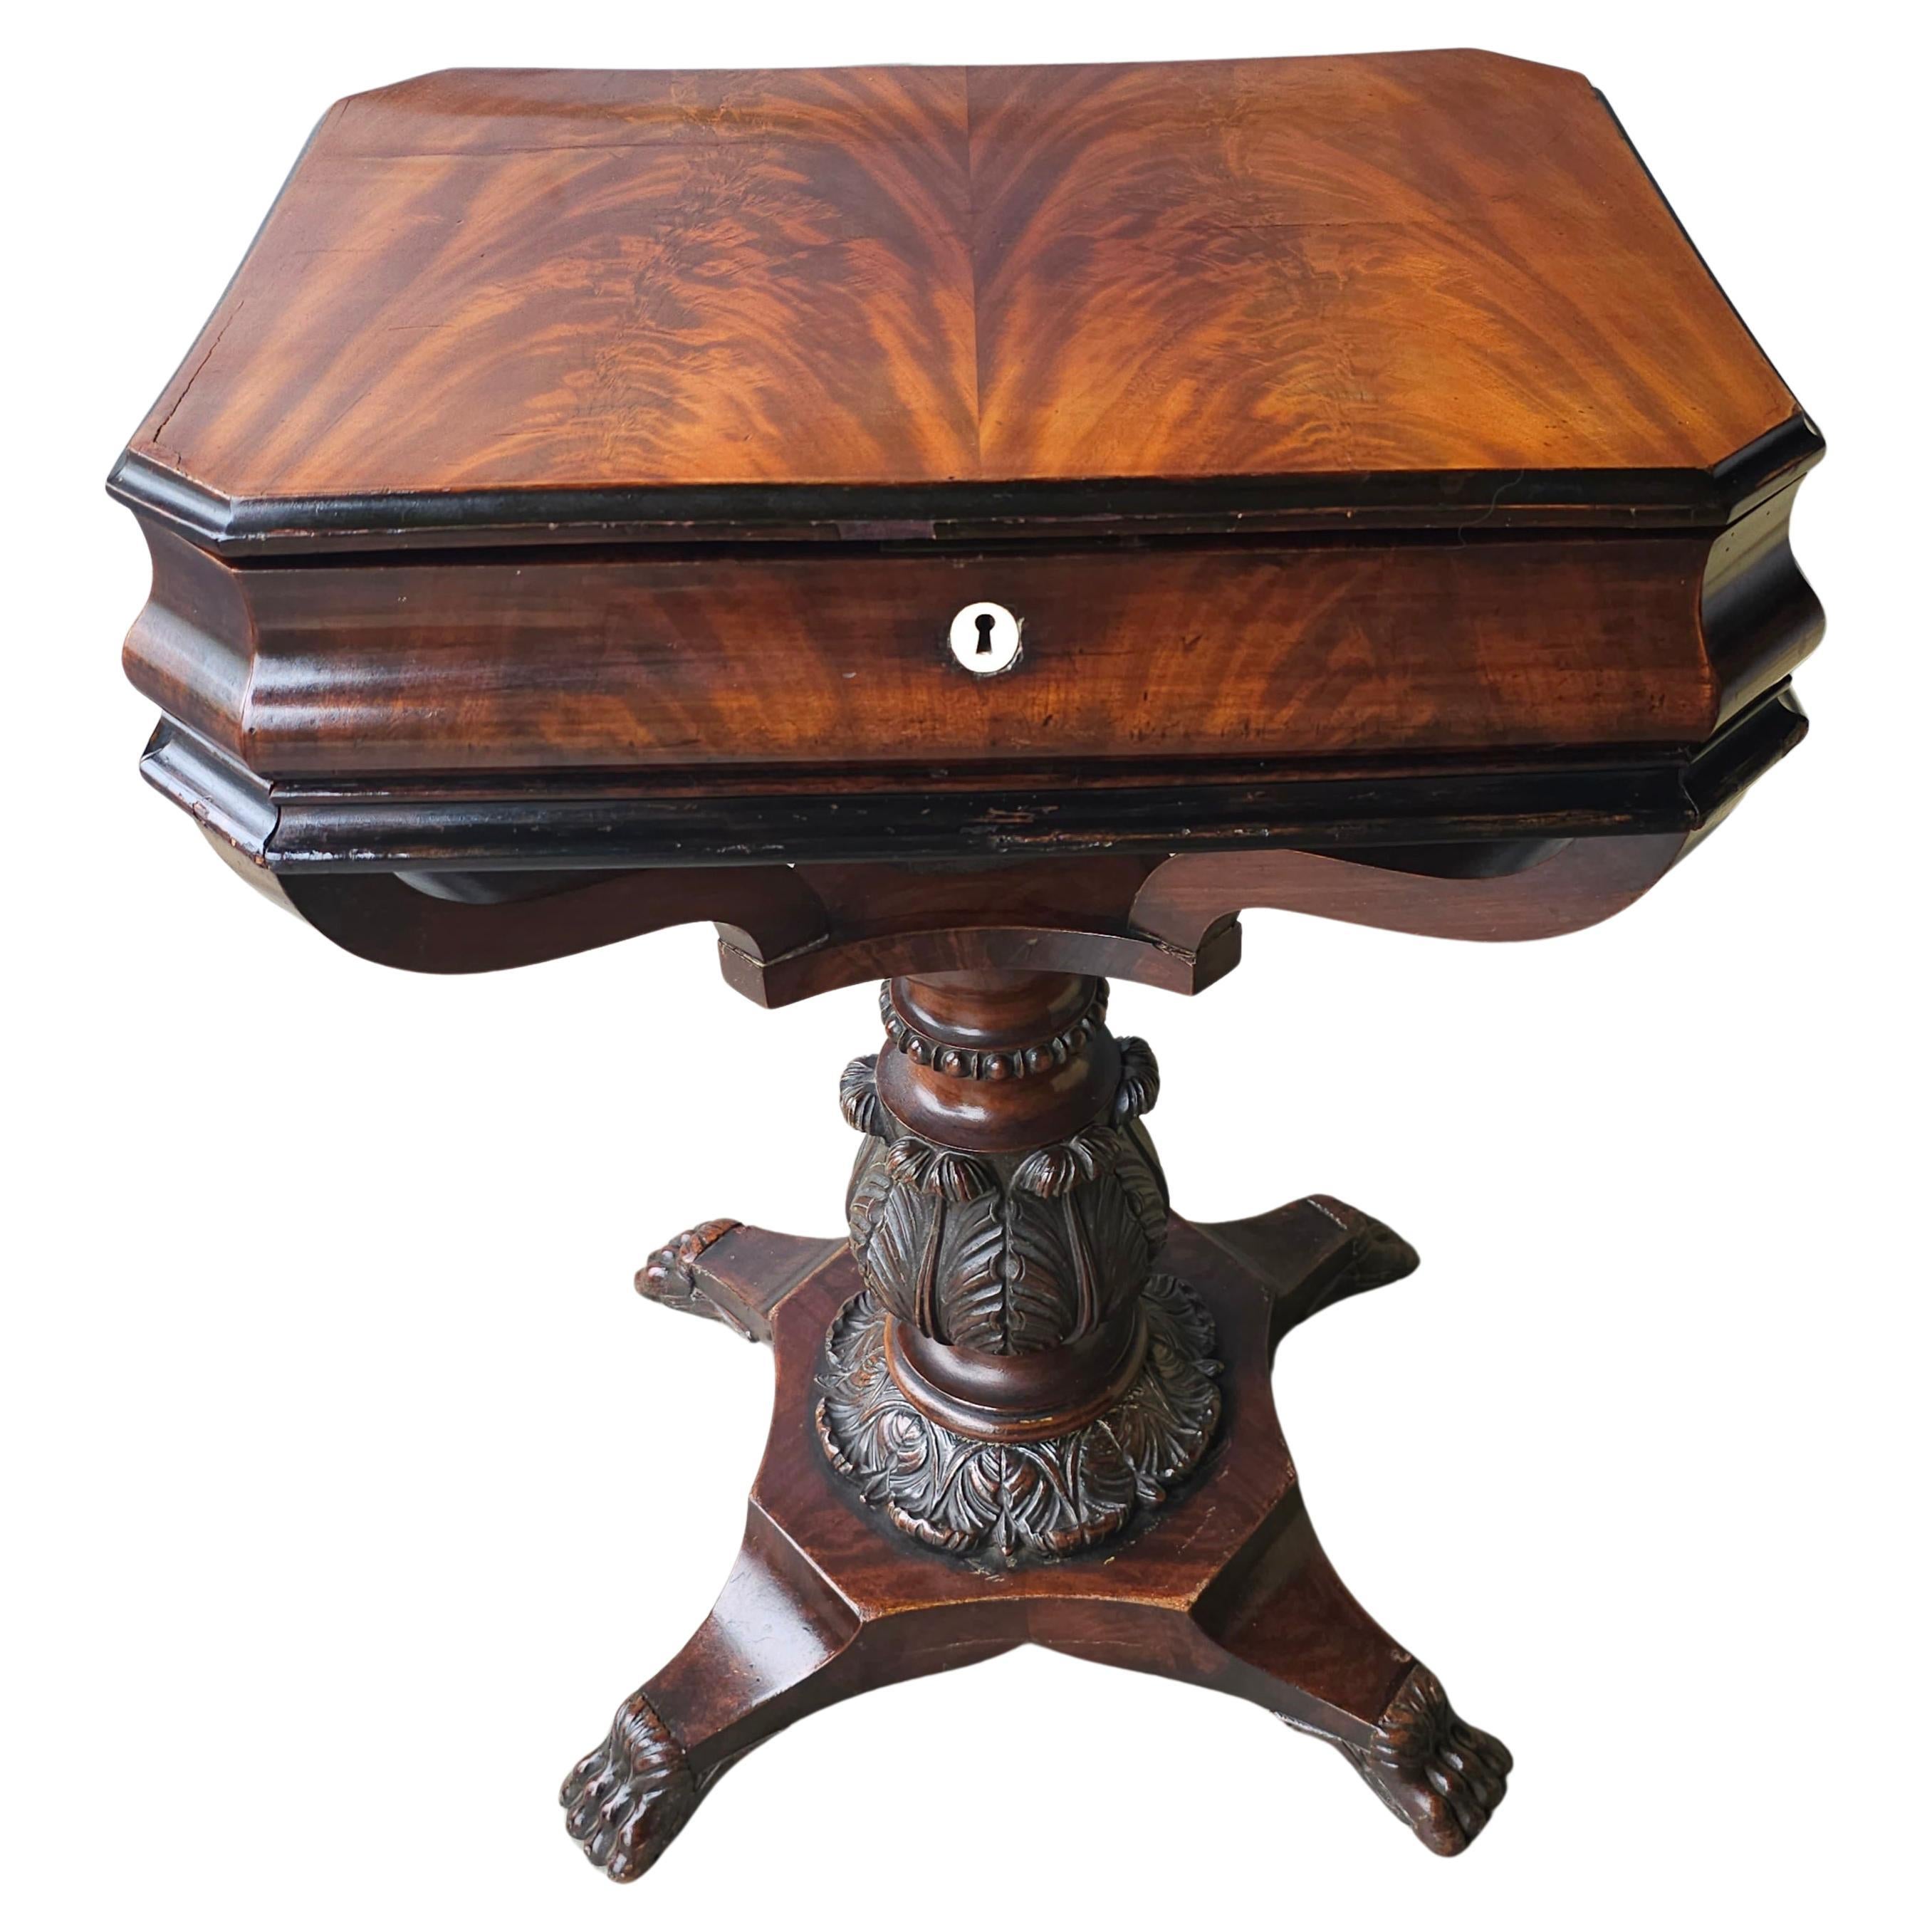 Early 19th Century George IV Partial Ebonized Bookmatched And Carved Mahogany Sewing Stand
The sewing stands Opens to view thirteen graduated, including two 8-slot radial, compartments, predominantly with lids.
Measures 22.5